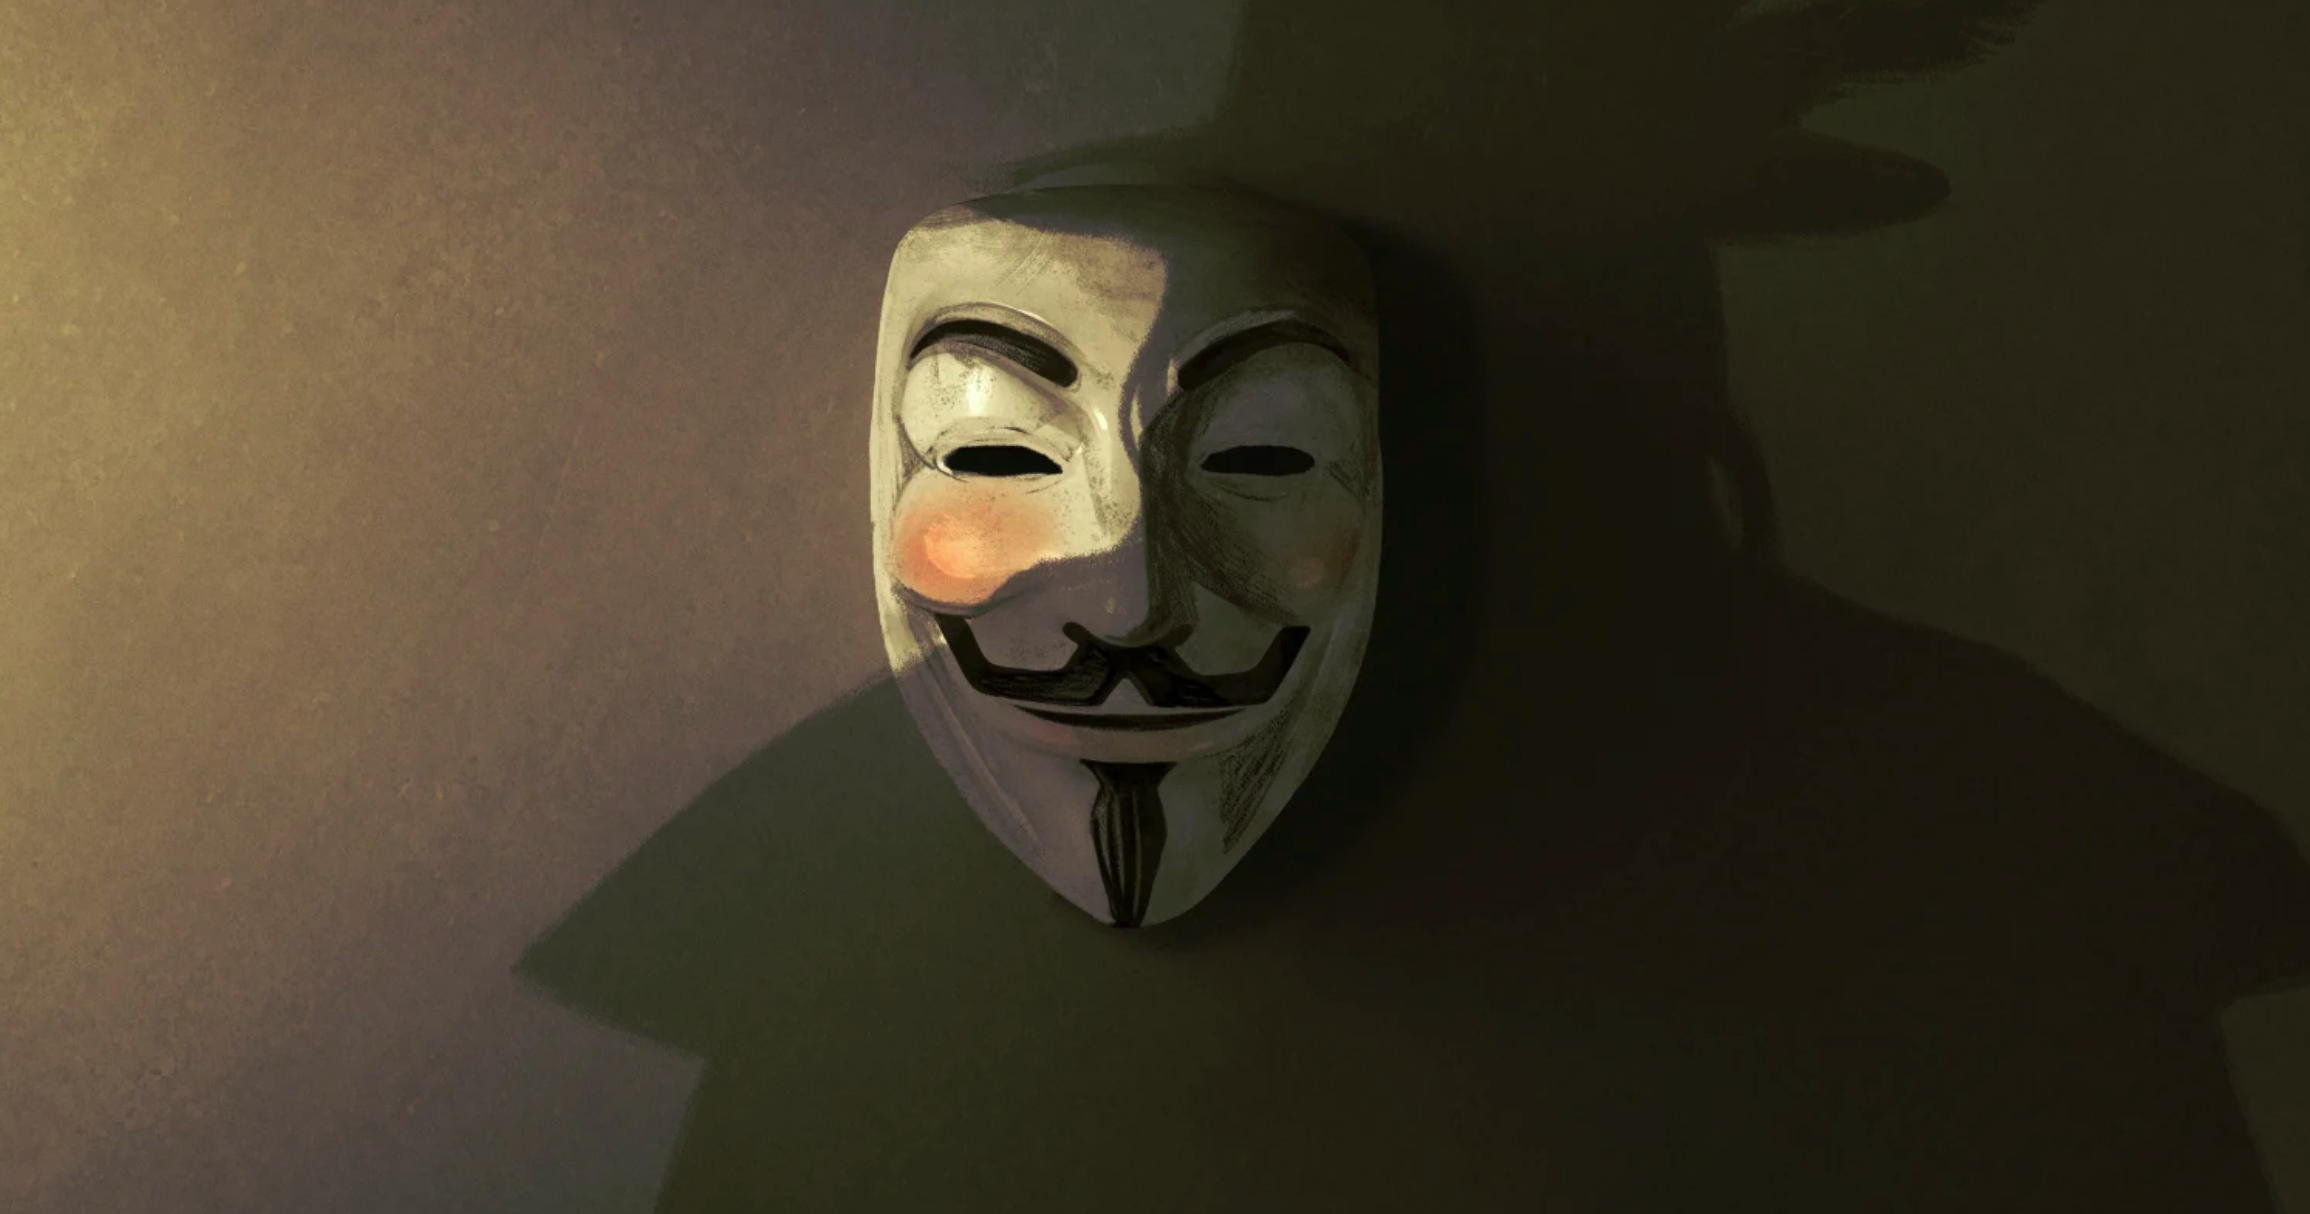 Who Is Guy Fawkes?